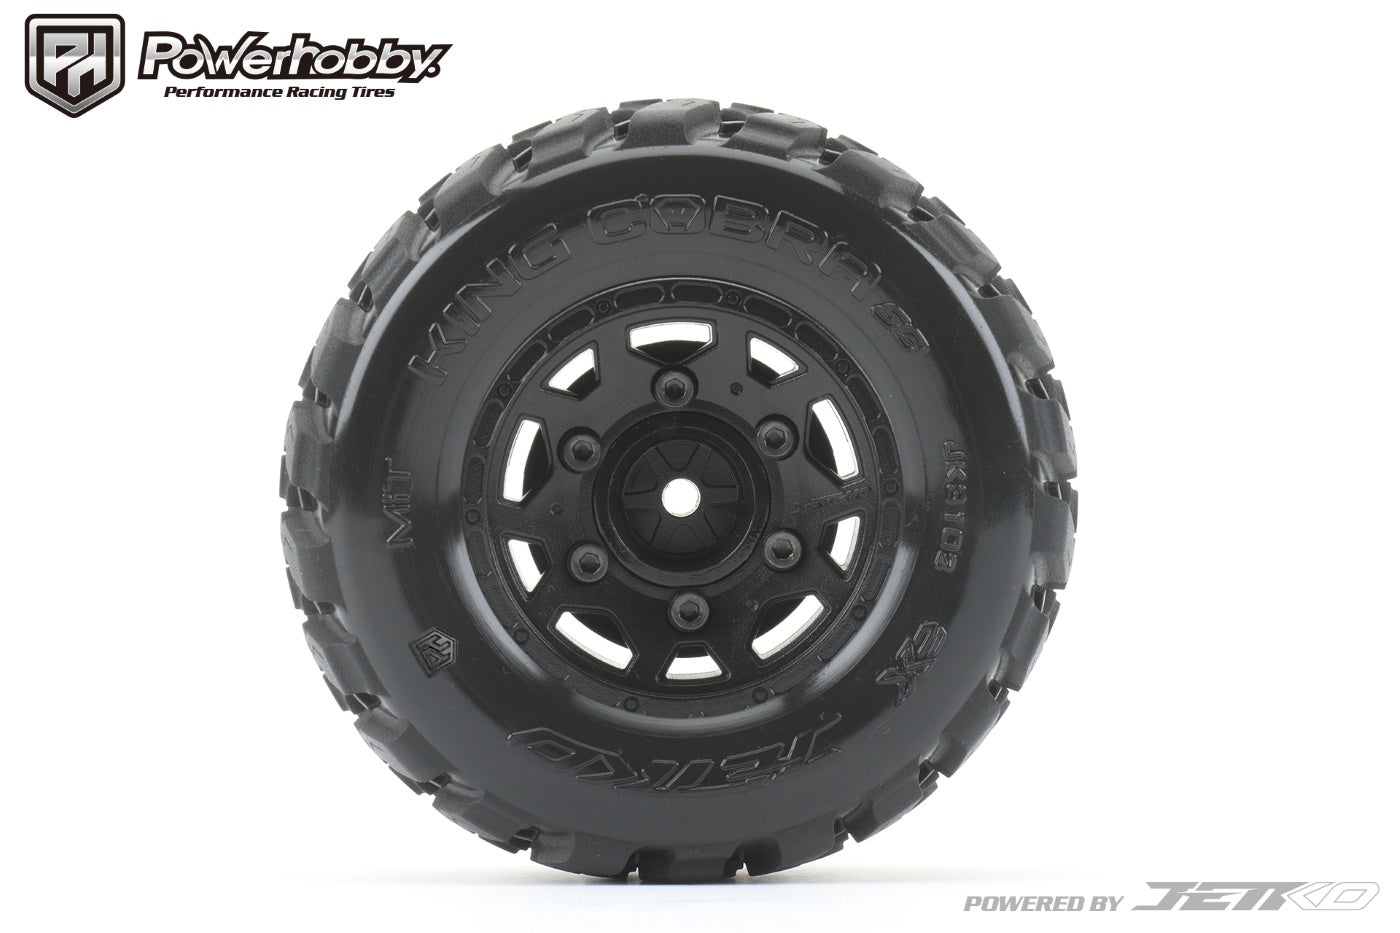 Powerhobby King Cobra 1/10 SC Belted Tires (2) with Removable Hex Wheels - PowerHobby